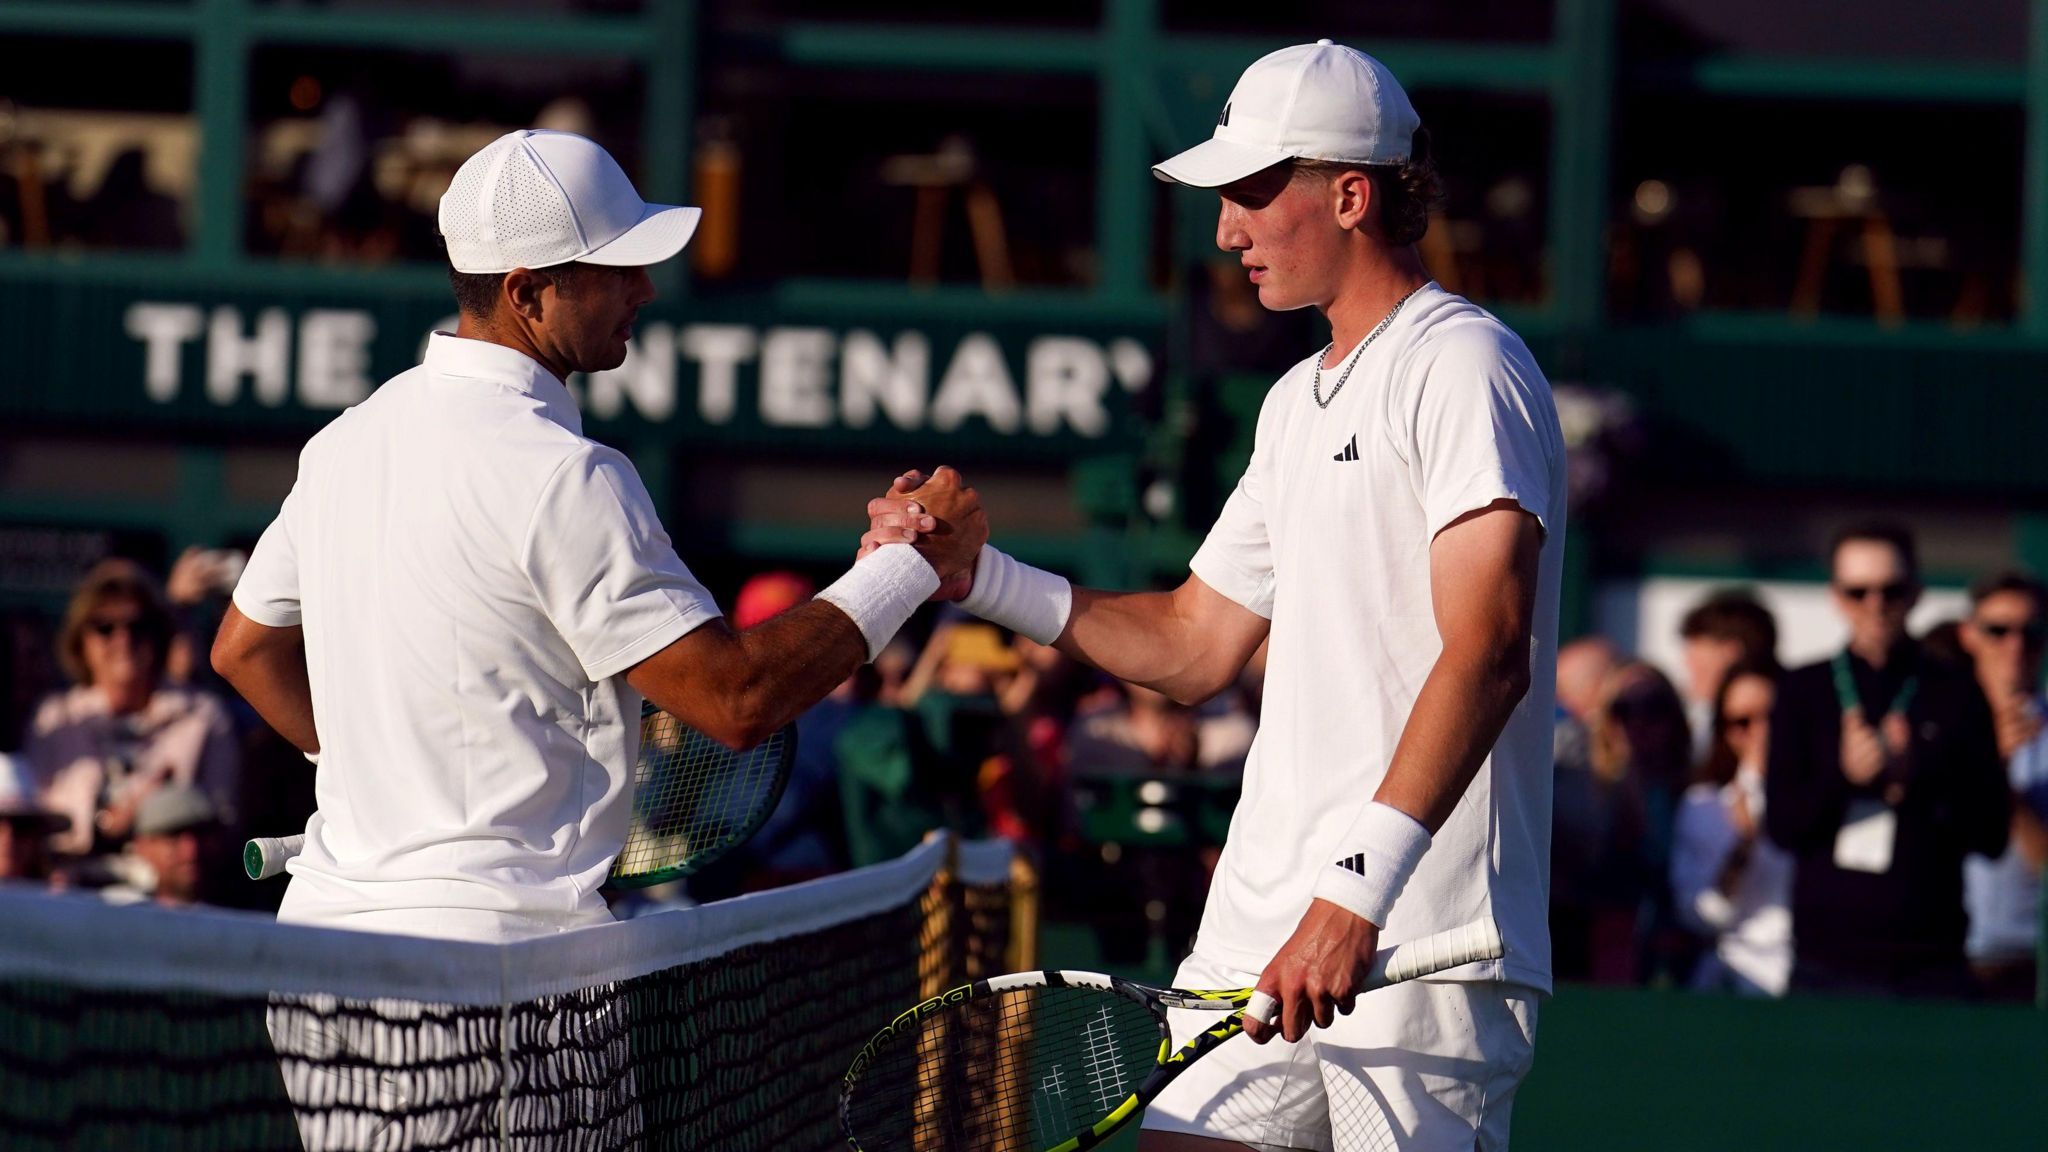 Henry Searle (right) and Marcos Giron shake hands at Wimbledon